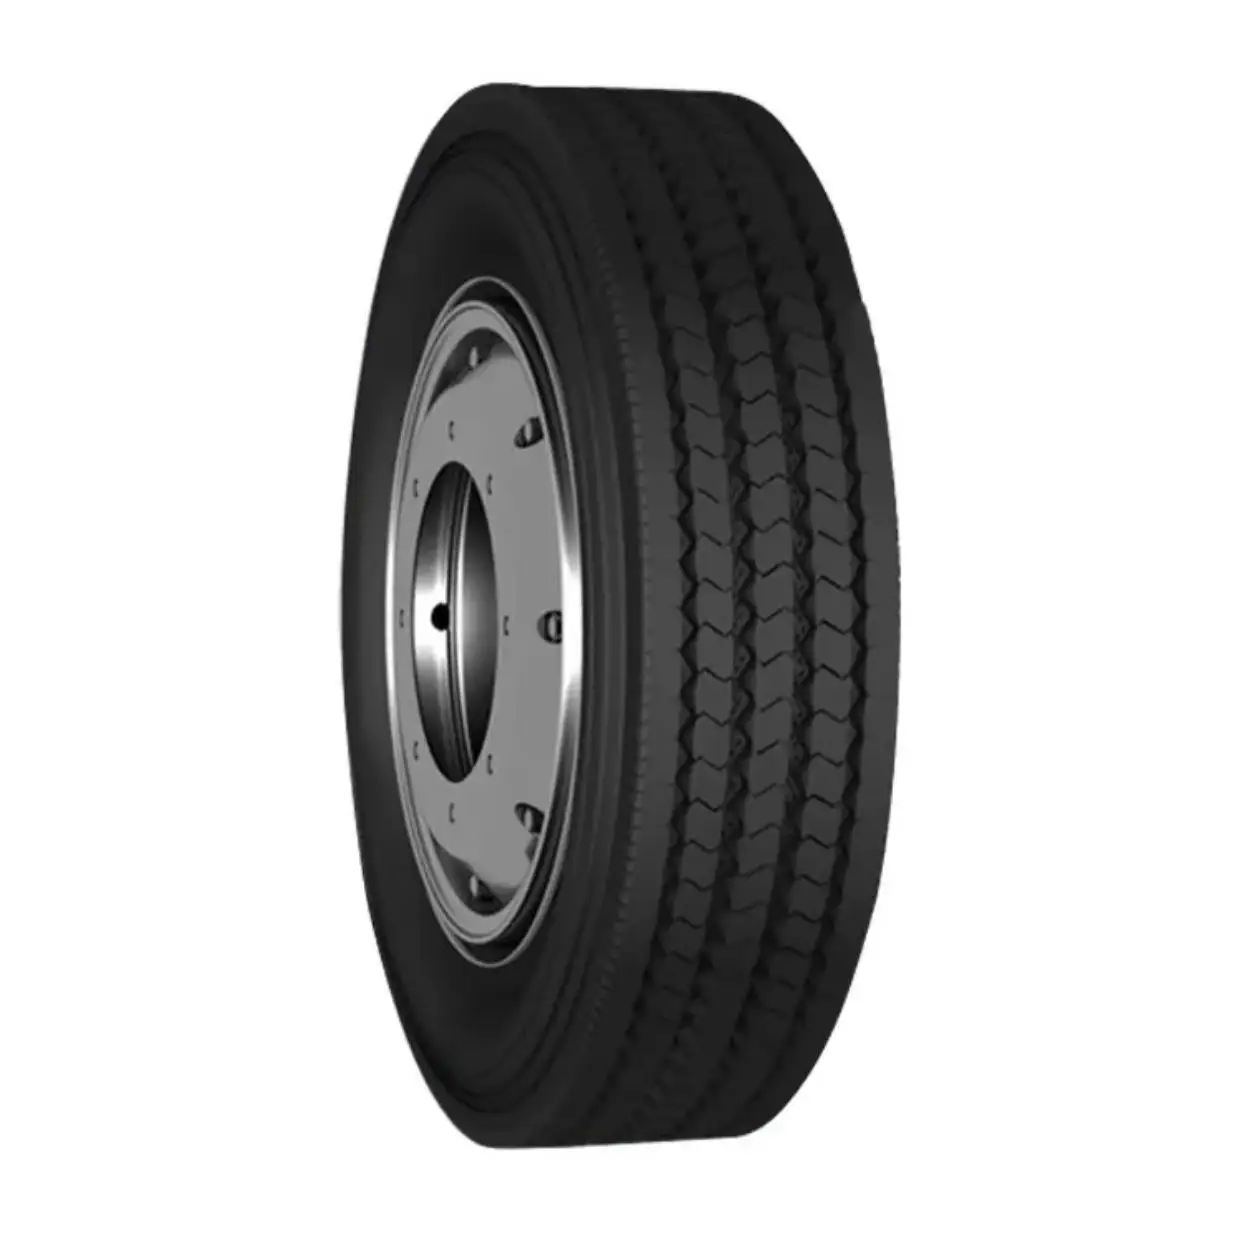 Used Secondhand Tyres, Perfect Used Car Tires Pilot Super Sport (PSS) Tires - 295/35/20 & 25 for sale